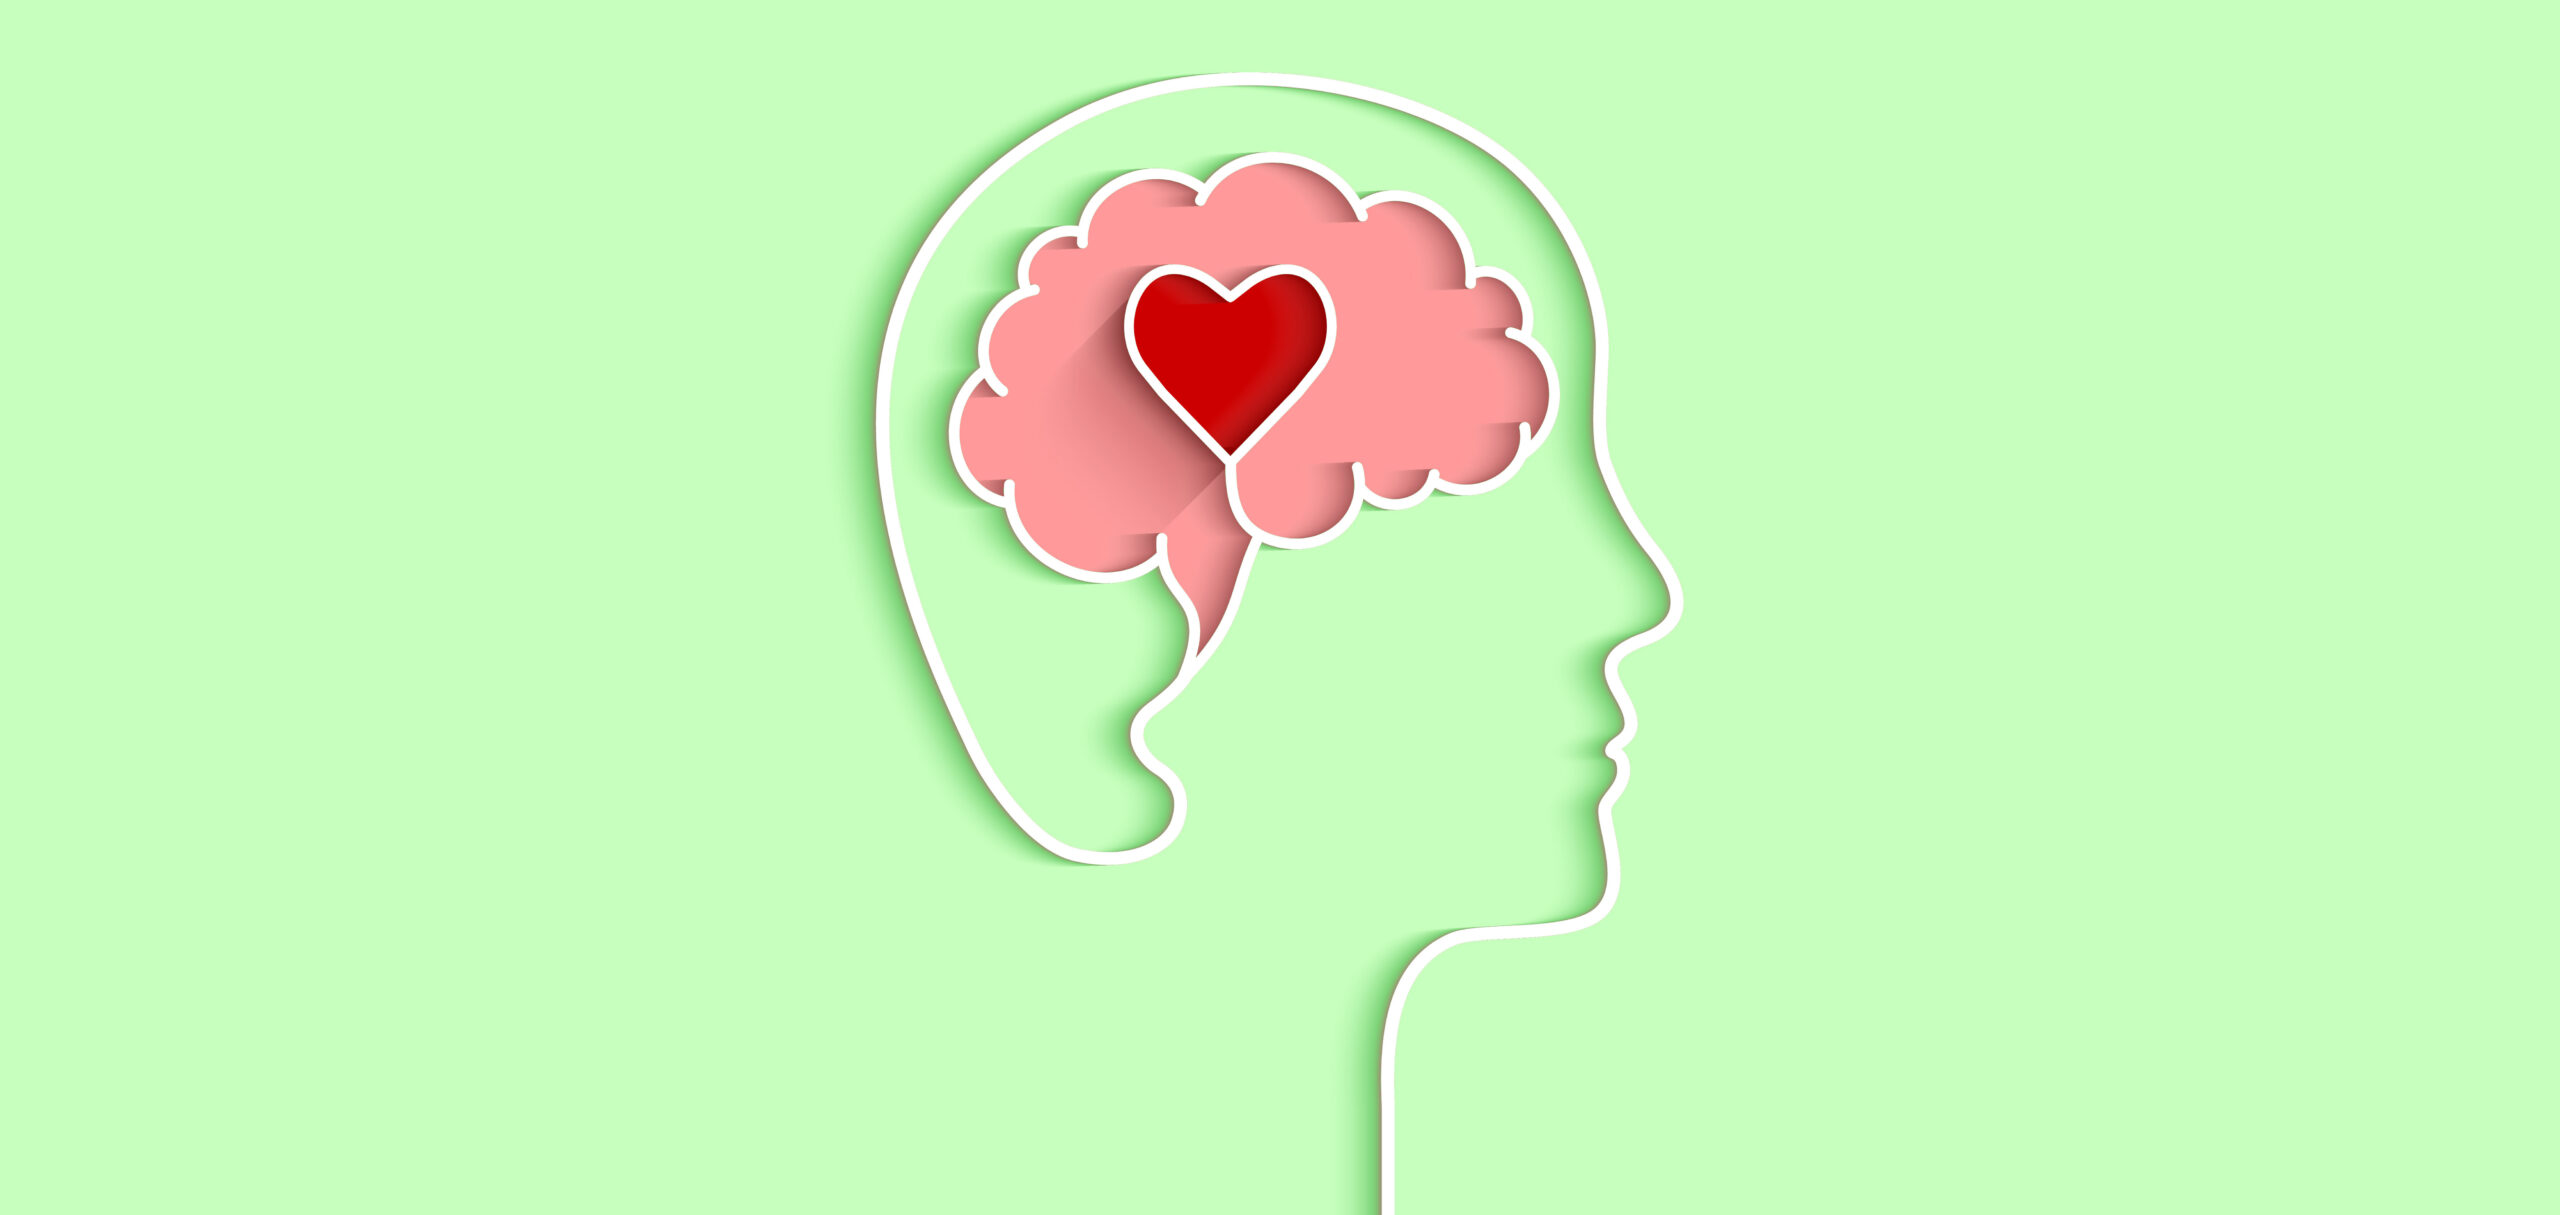 Head and brain outline with heart concept. Vector illustration in flat design with shadow on light green background.